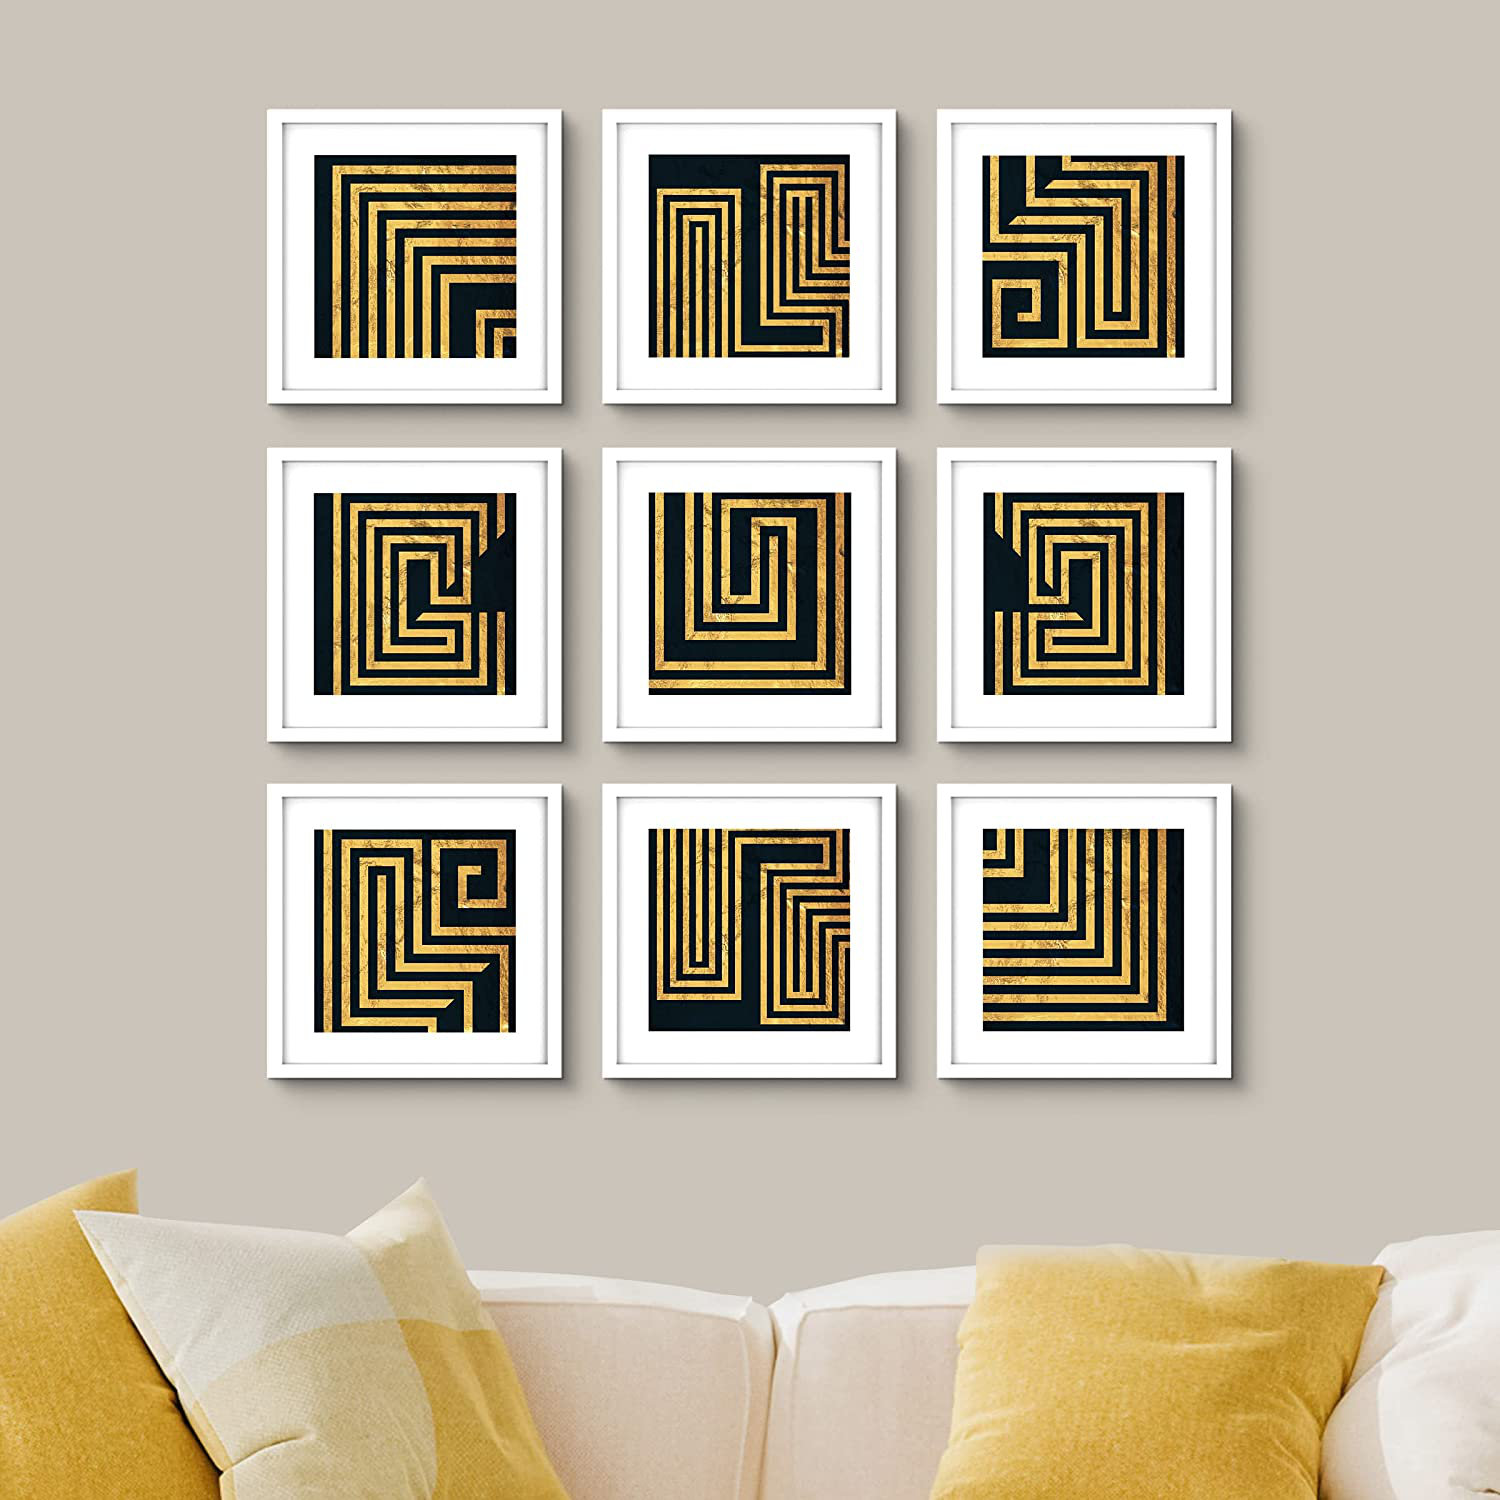 Maze Dramatic Pieces Modern / On Art Fun SIGNLEADER Shapes Wayfair Puzzle | Acrylic Contemporary Gold Geometric Print 9 Framed Abstract Plastic Digital Line